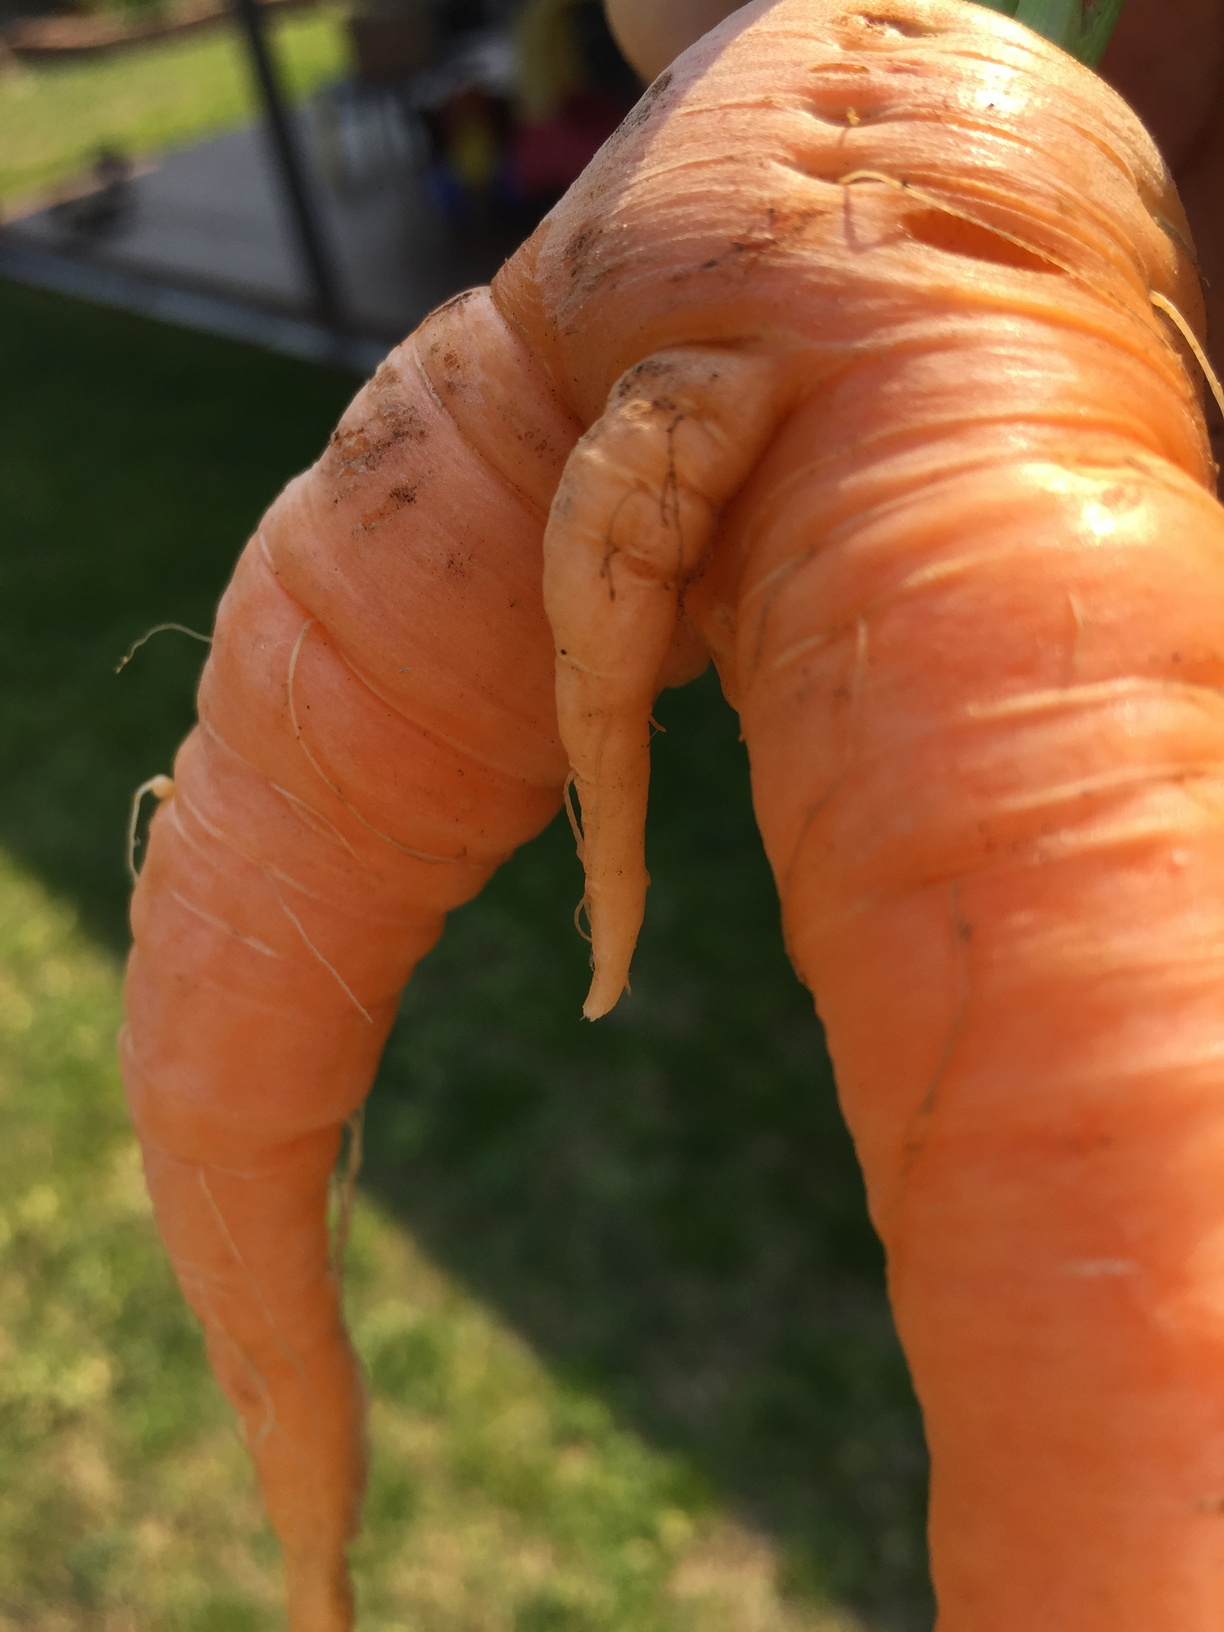 I laughed when I pulled this carrot out of the ground!